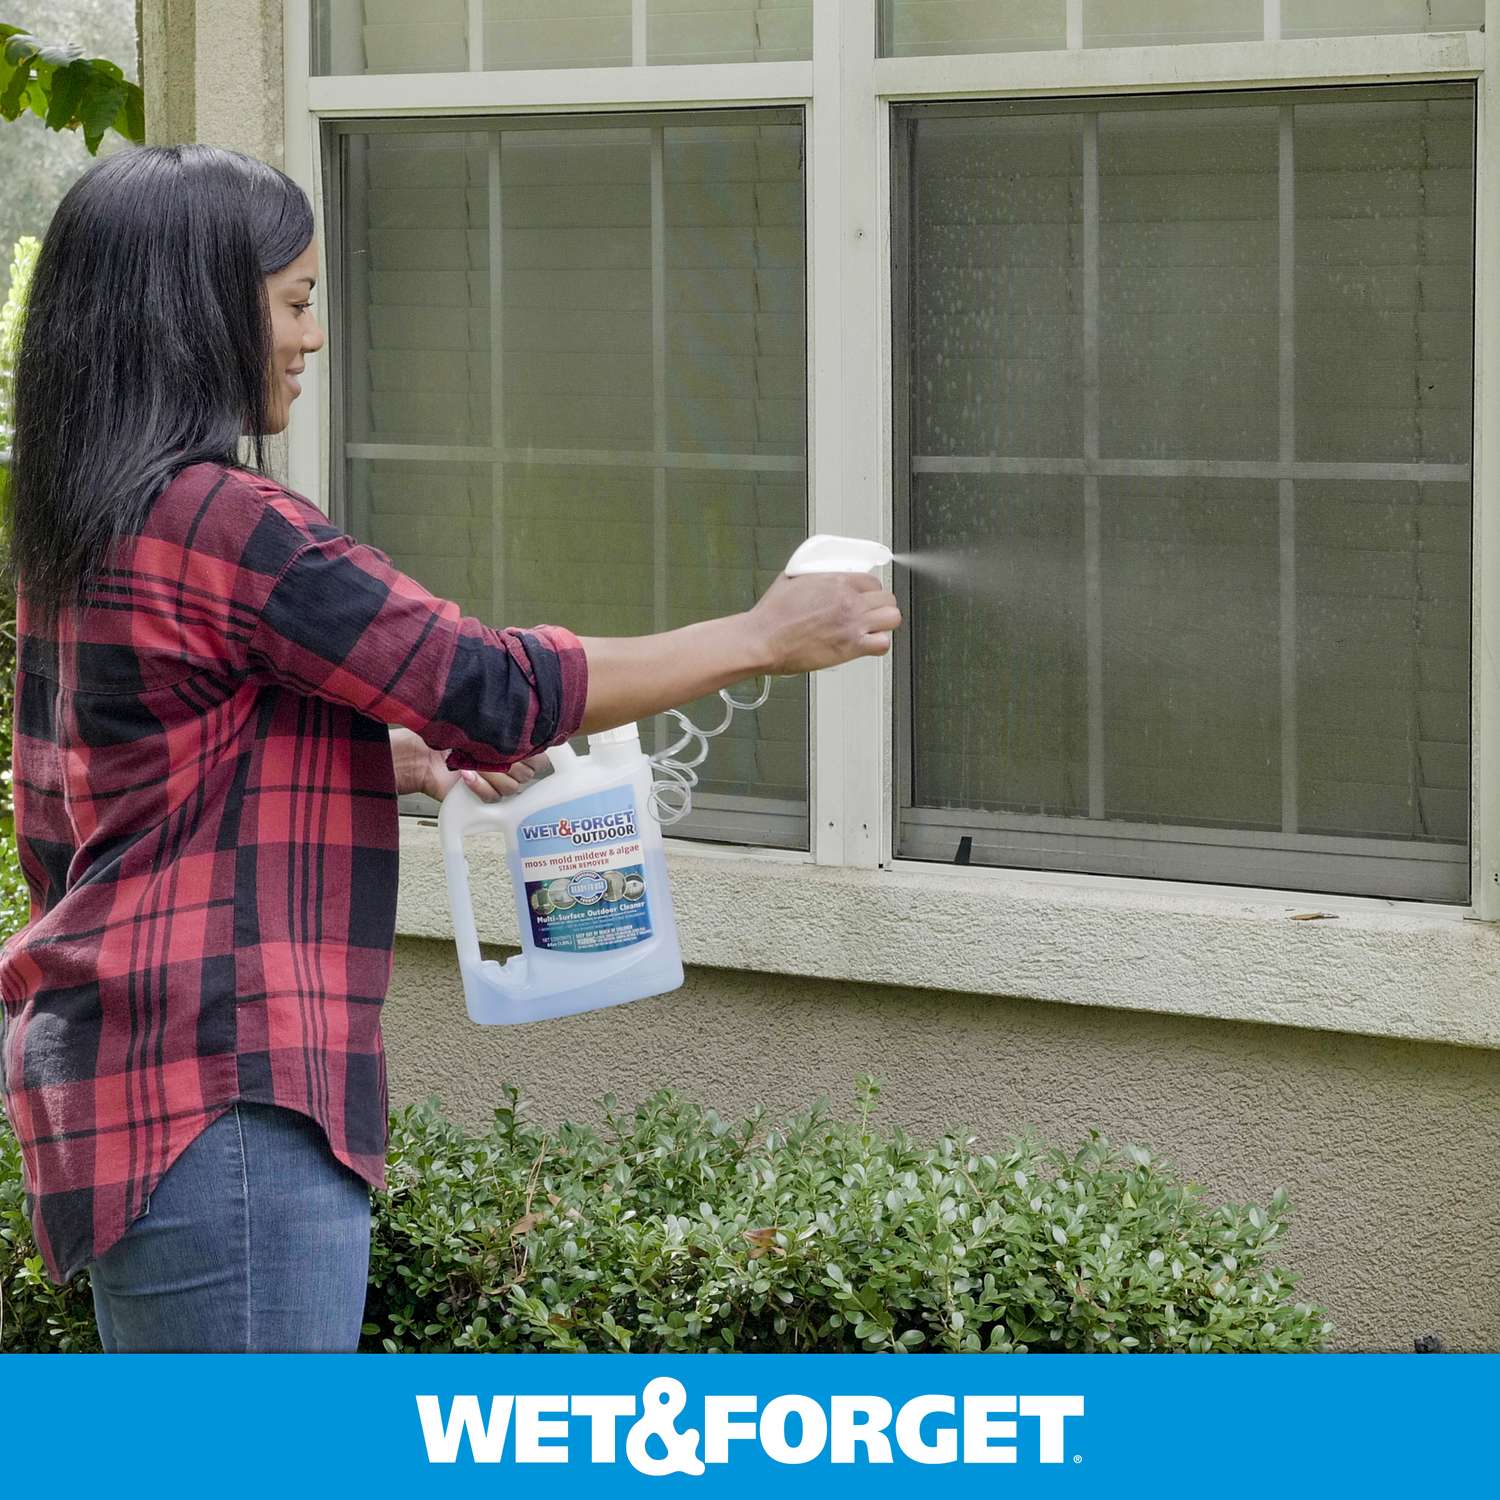 Wet & Forget Outdoor Ready to Use Mildew Stain Remover - 64 oz jug